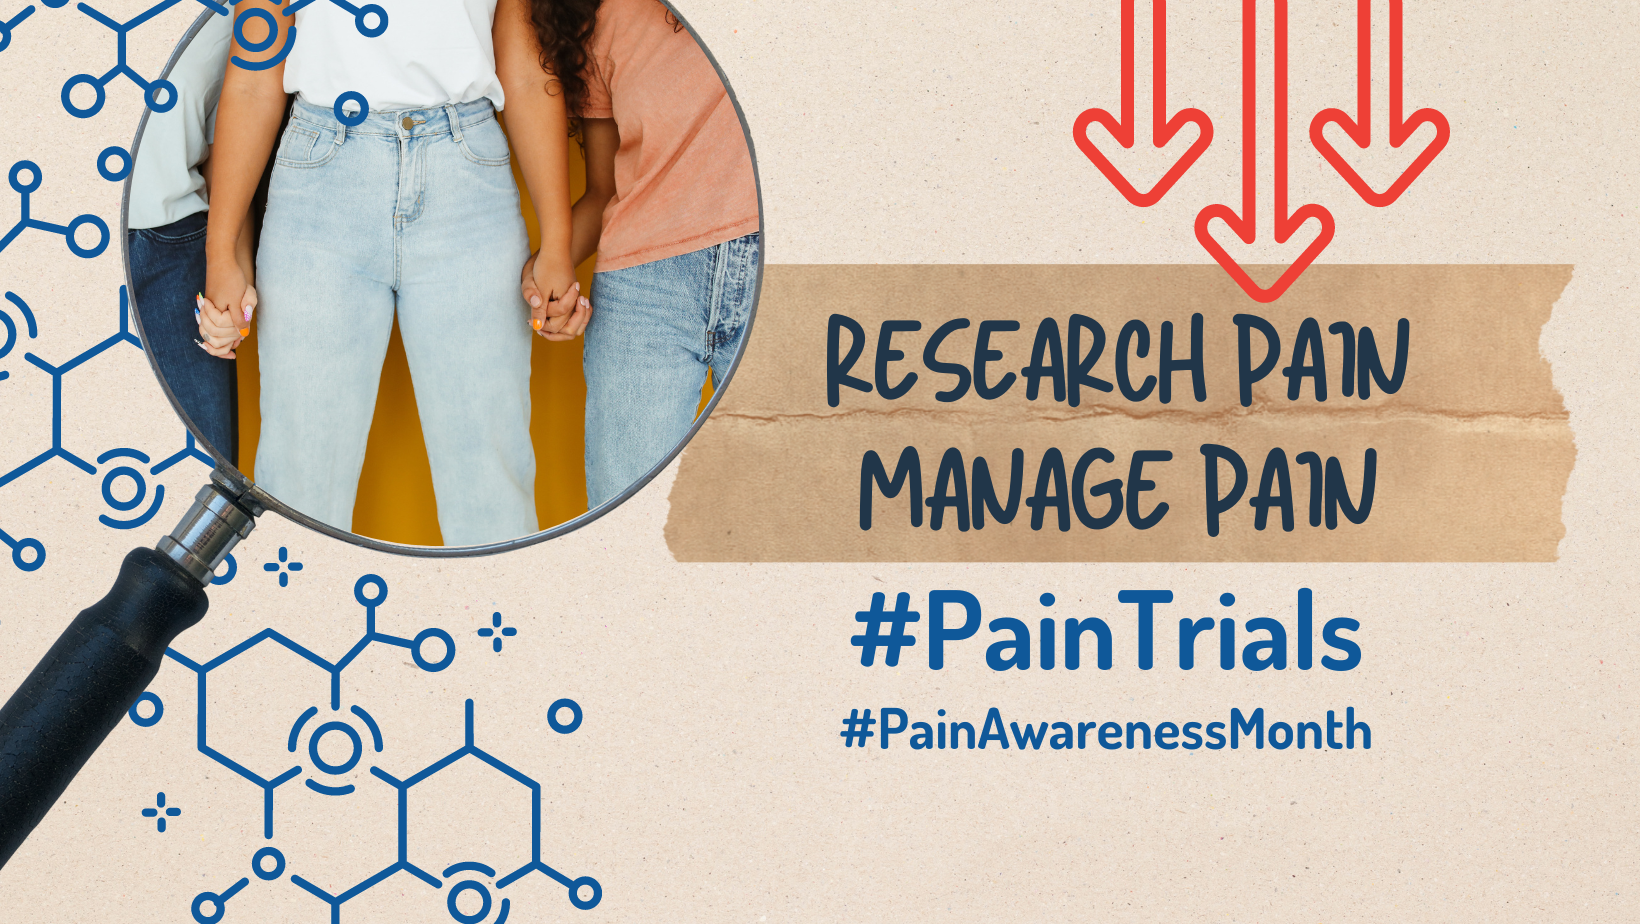 Research Pain to Manage Pain